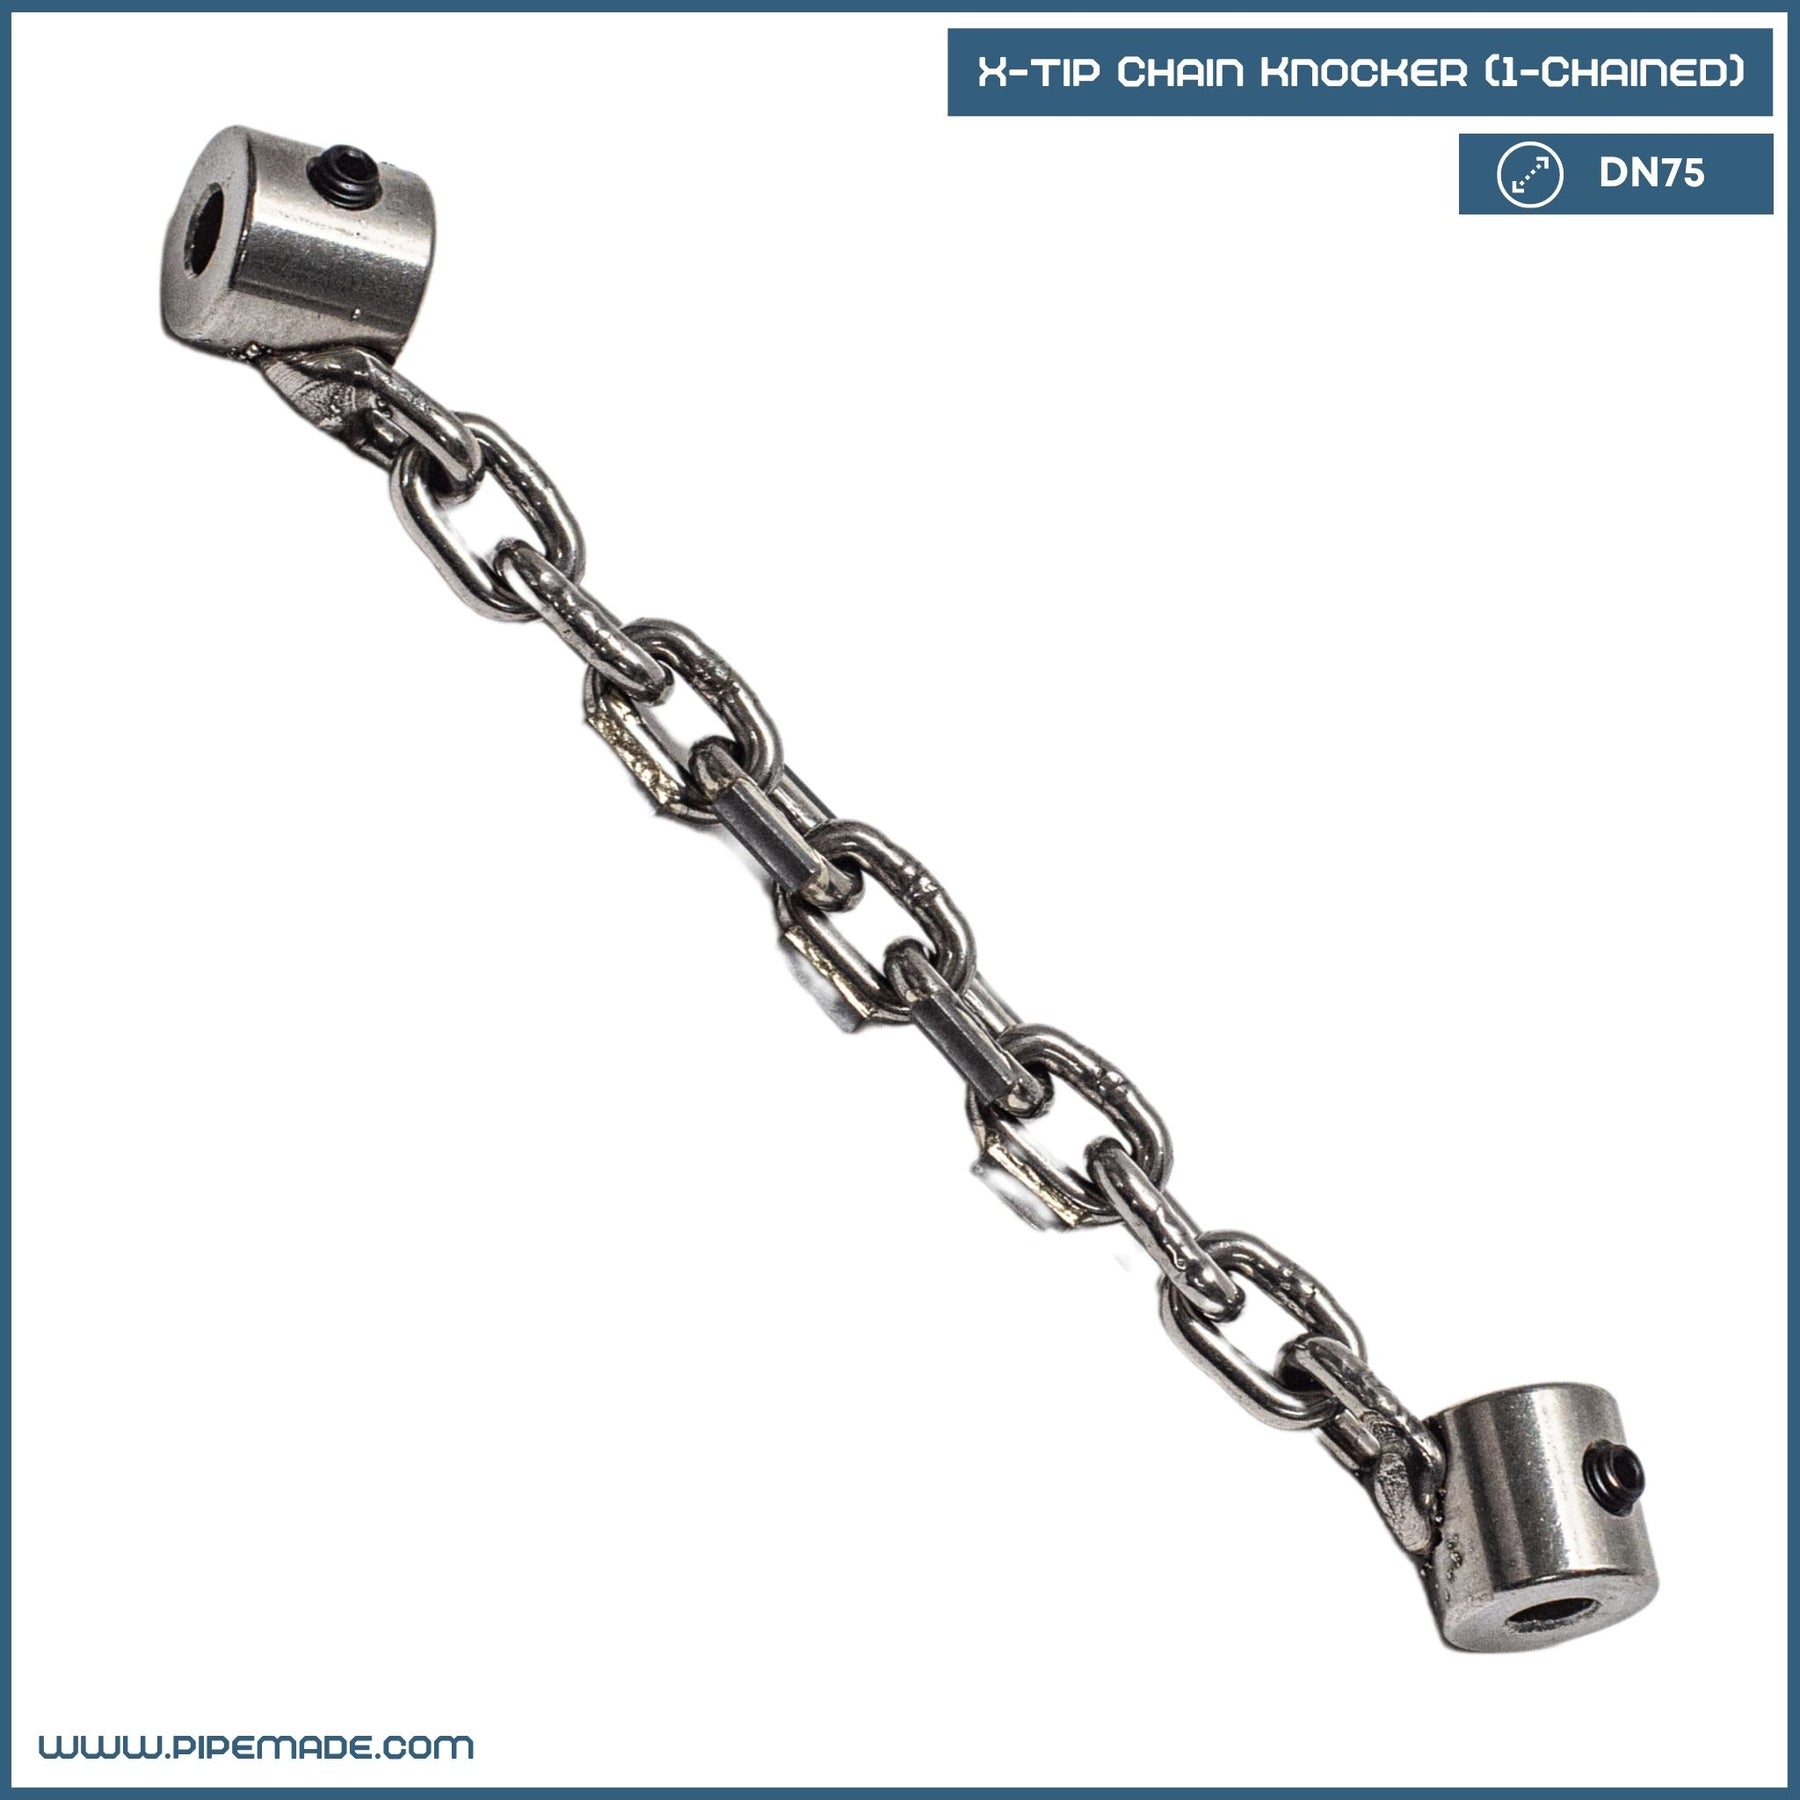 X-Tip Chain Knocker (1-Chained) | X-tip Chain Knockers. Cleaning Chains | Zewer | zewer-x-tip-chain-knocker-1-chained